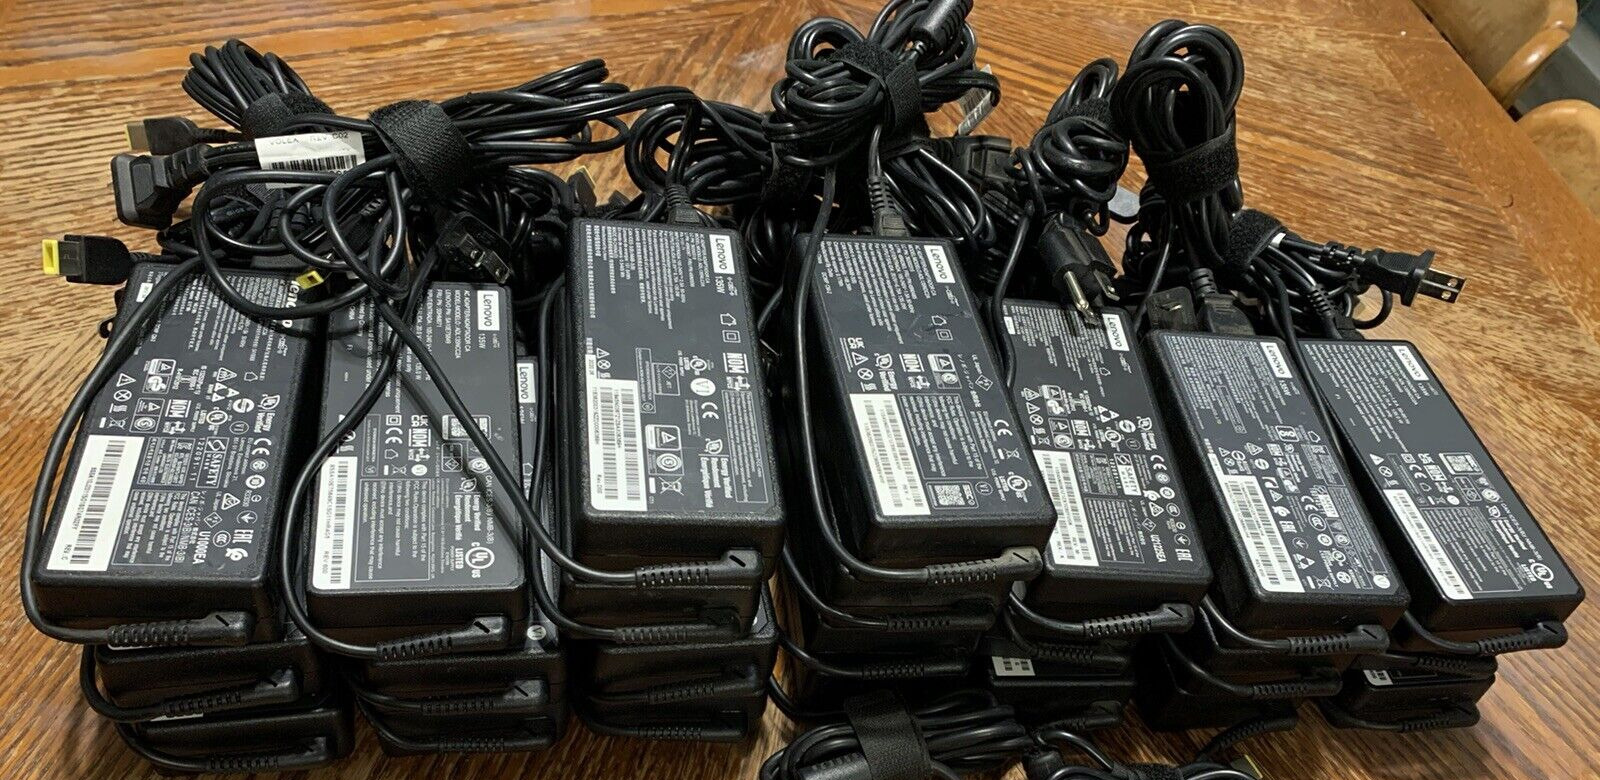 Lot of 23 OEM Lenovo 135W Yellow Square Tip Adapter Laptop Charger TESTED / GOOD